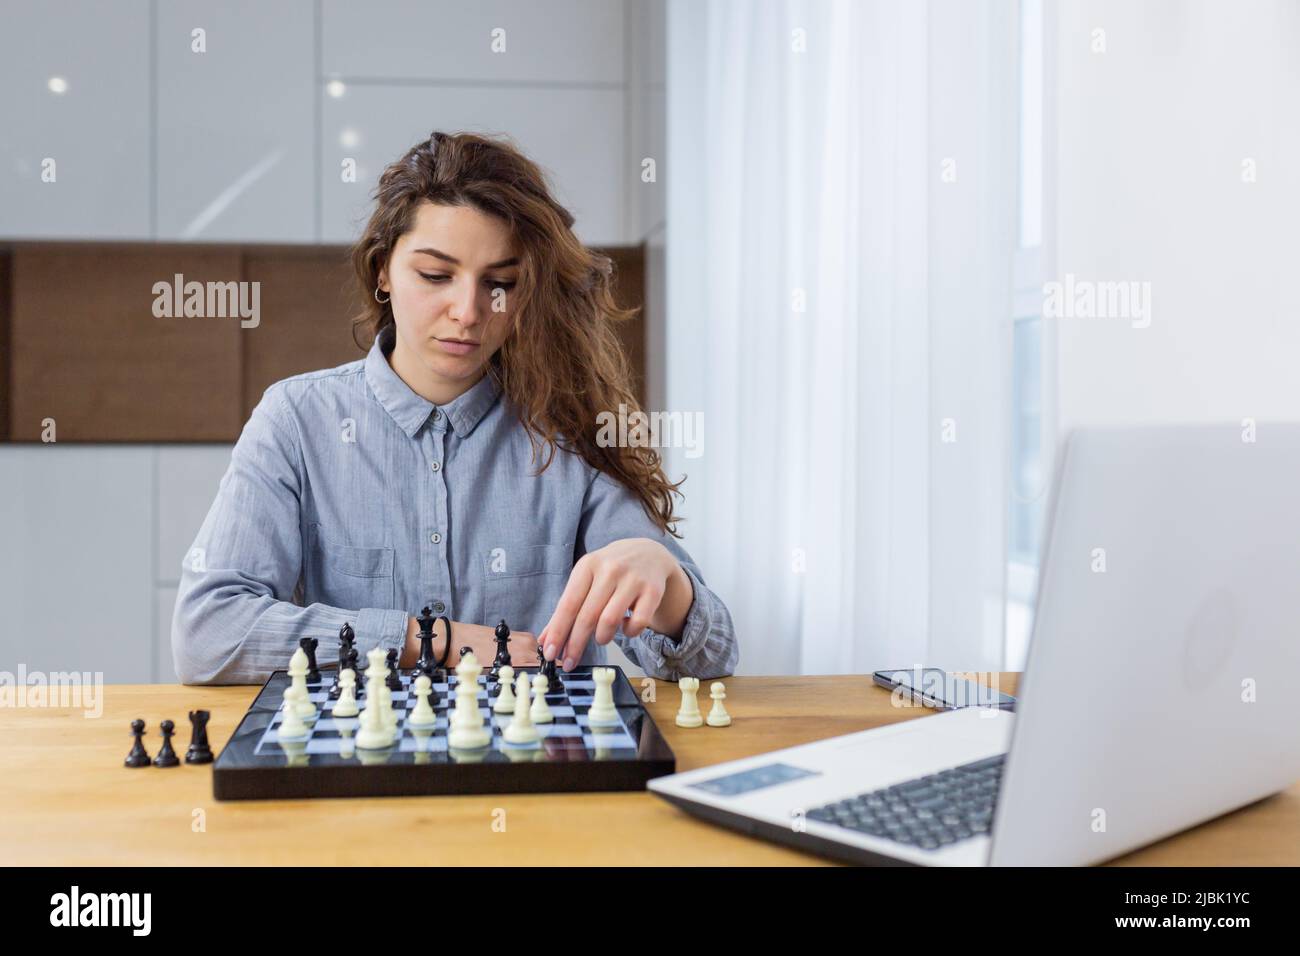 3,200+ Play Chess Online Stock Photos, Pictures & Royalty-Free